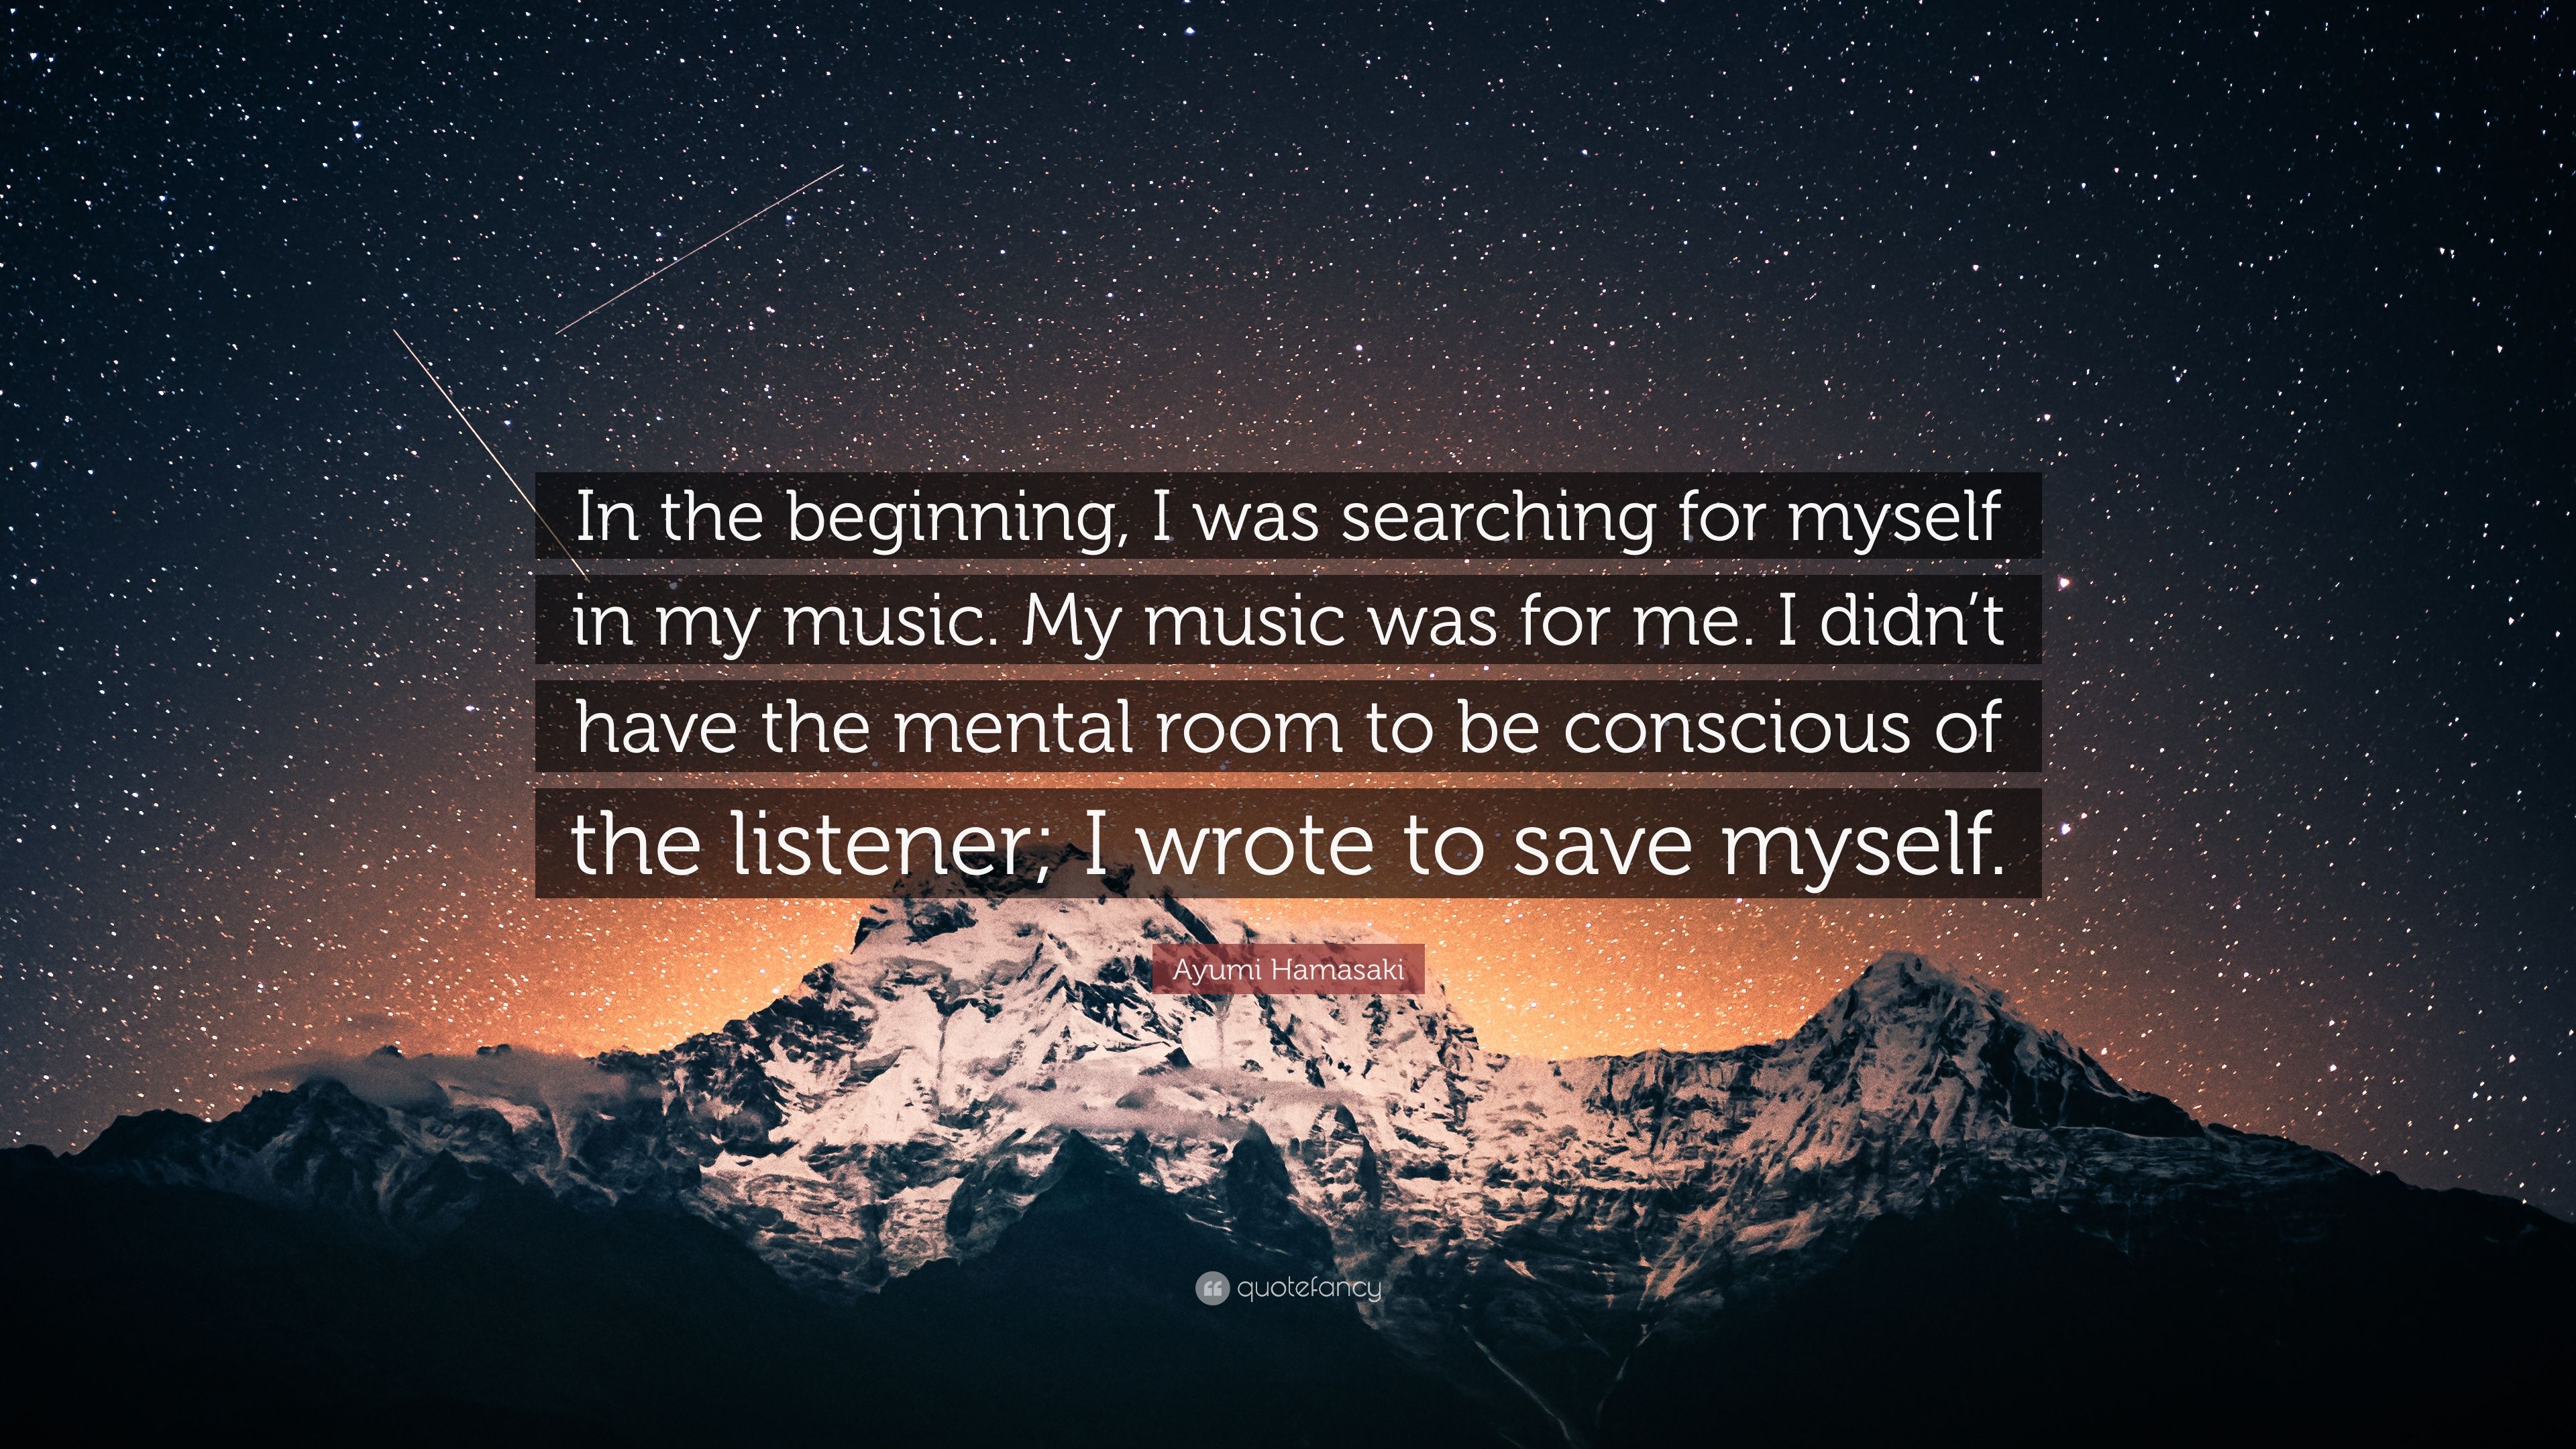 Ayumi Hamasaki Quote: “In the beginning, I was searching for myself ...